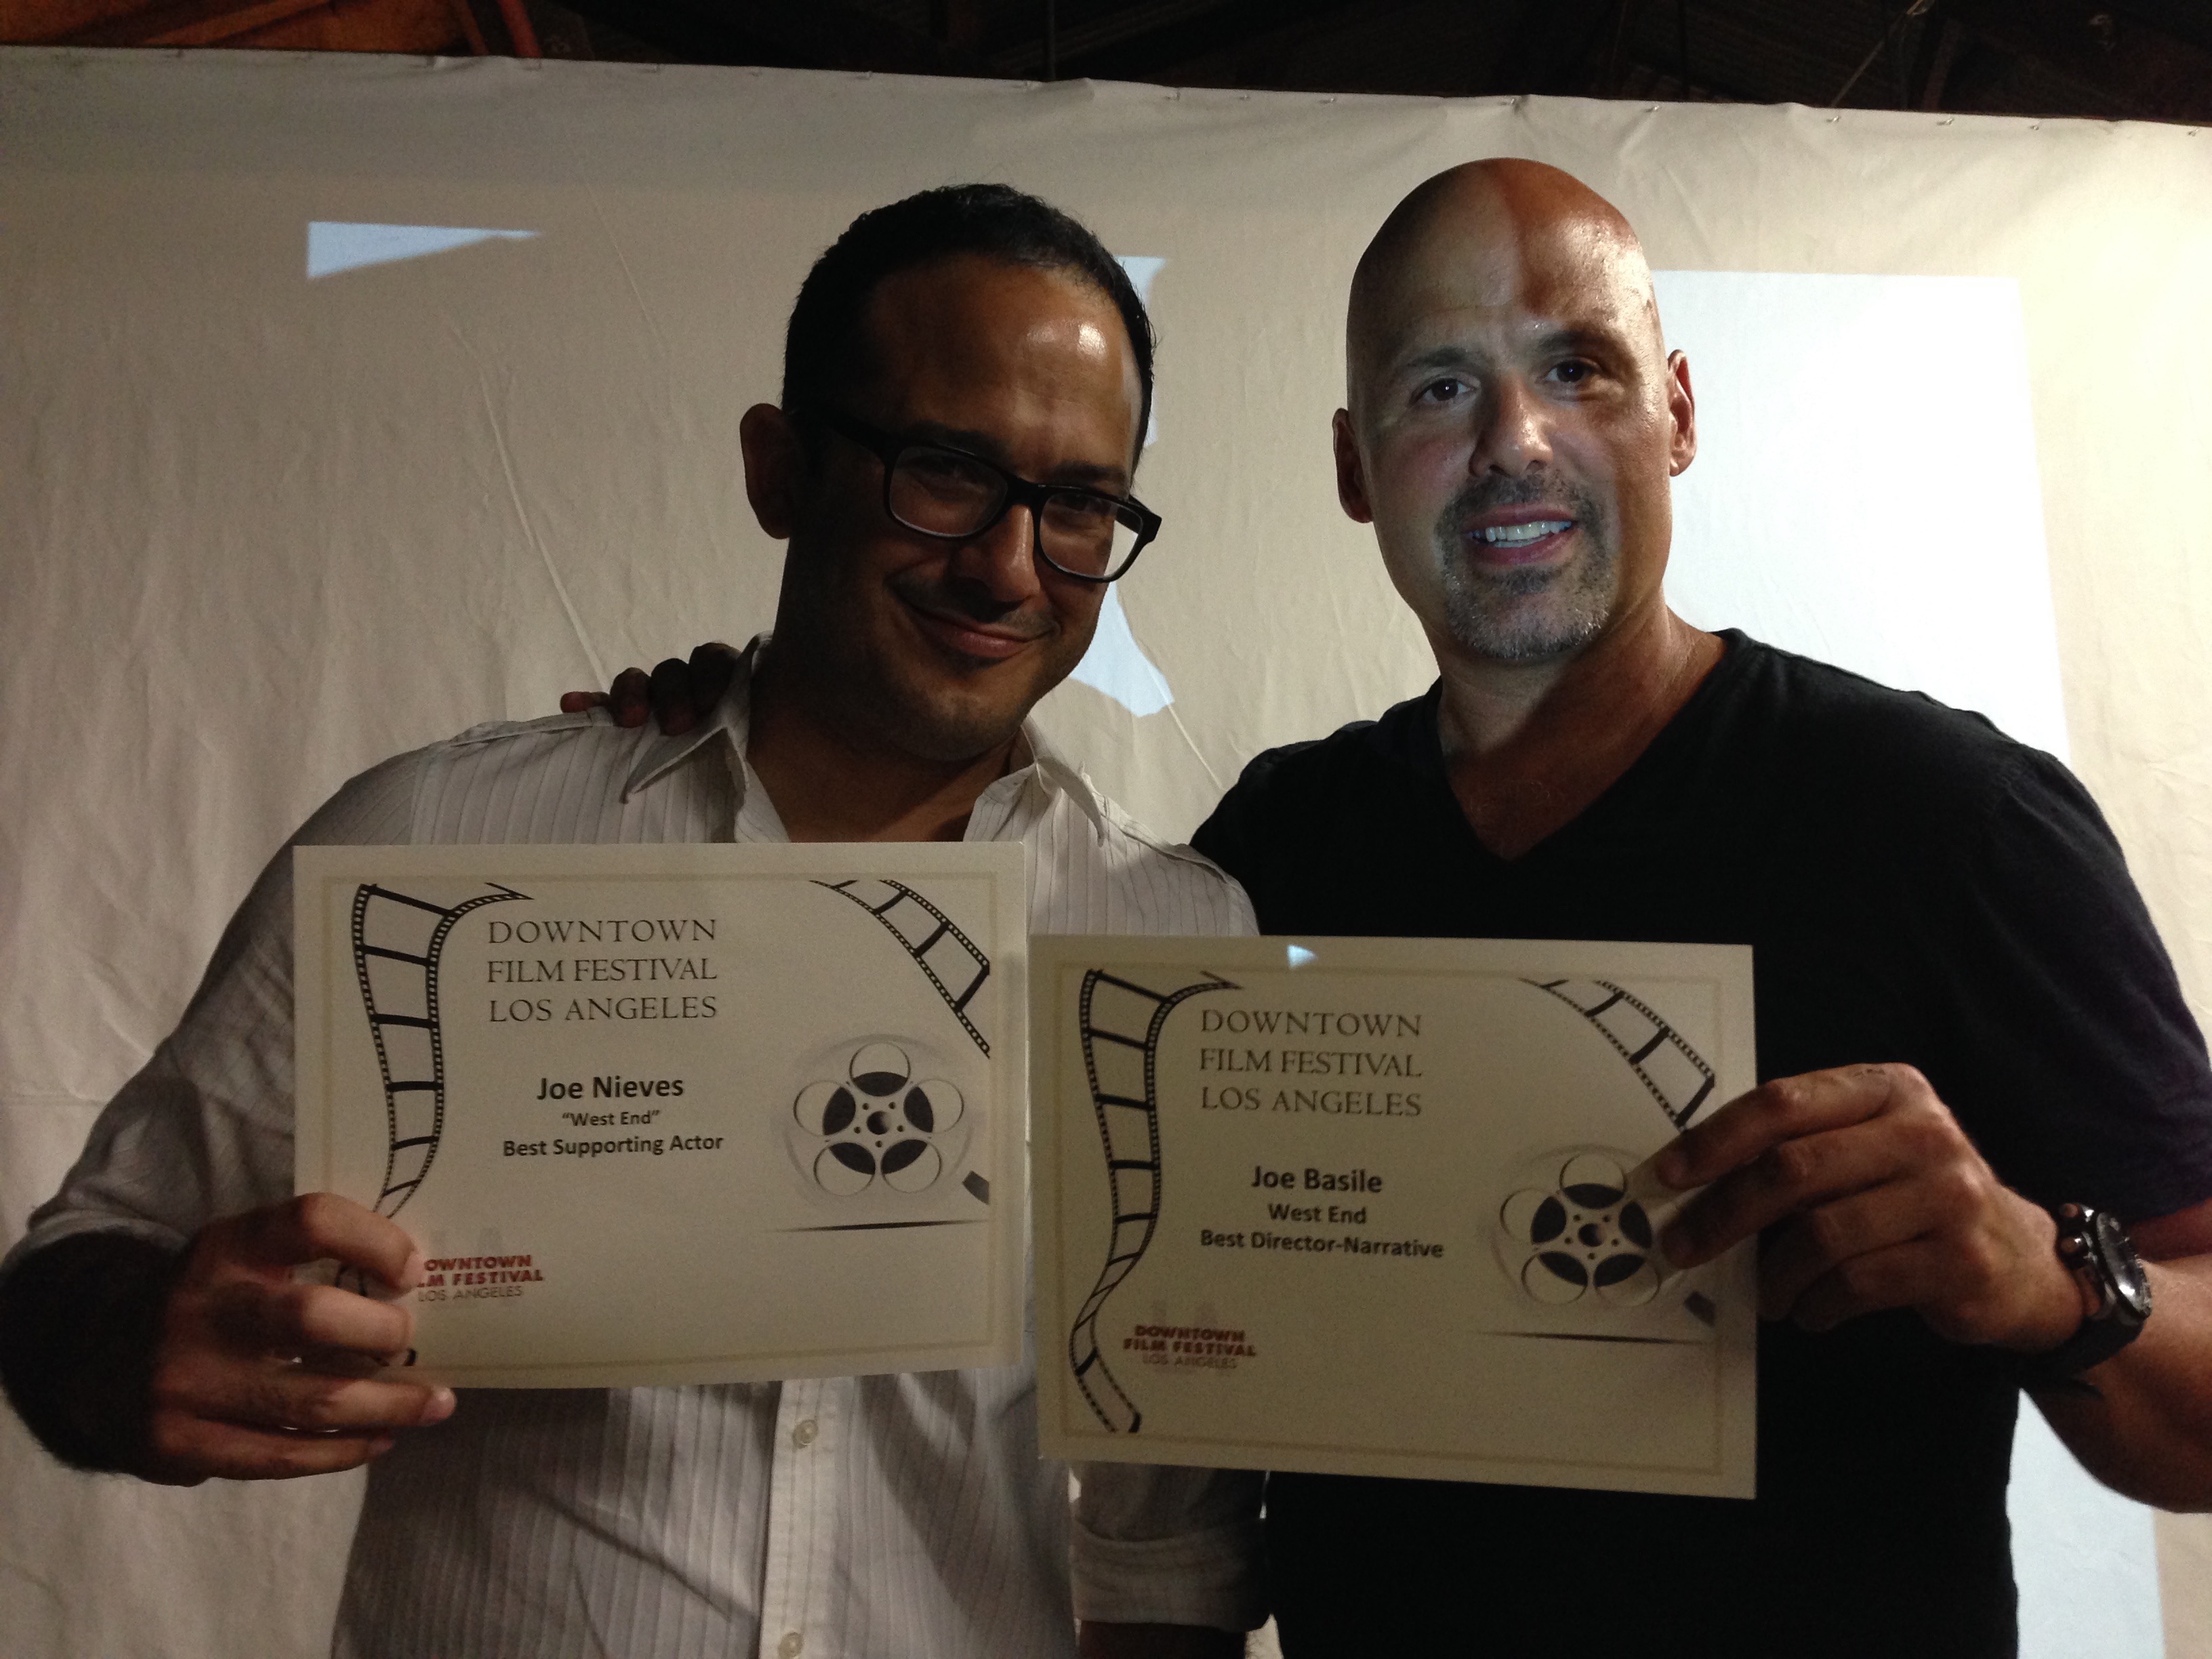 Joe Nieves, Best Supporting Actor, and Joe Basile, Best Director, at the Downtown Film Festival, Los Angeles. WEST END